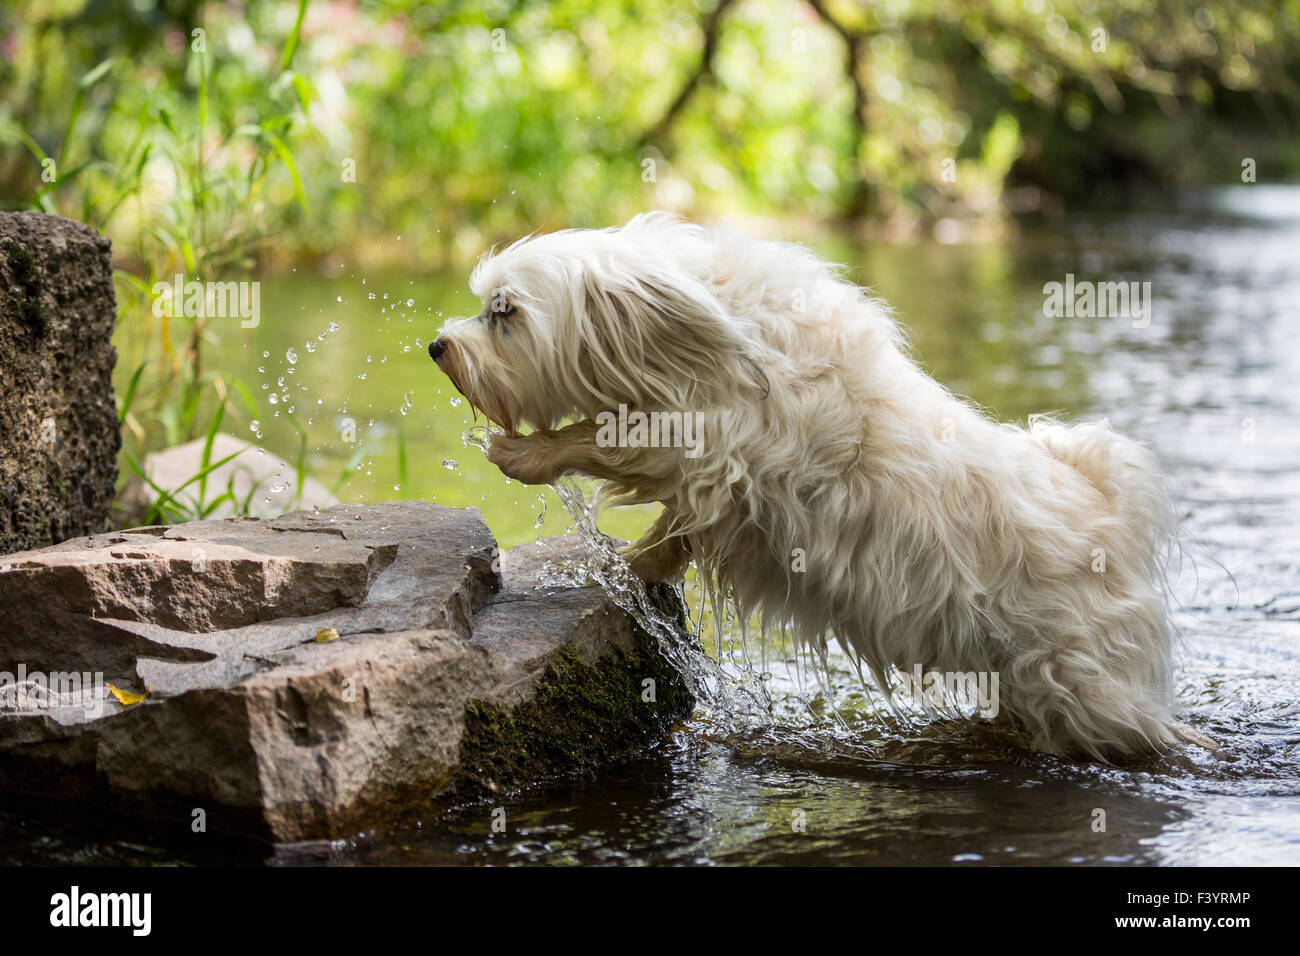 Dog jumps out of the water Stock Photo